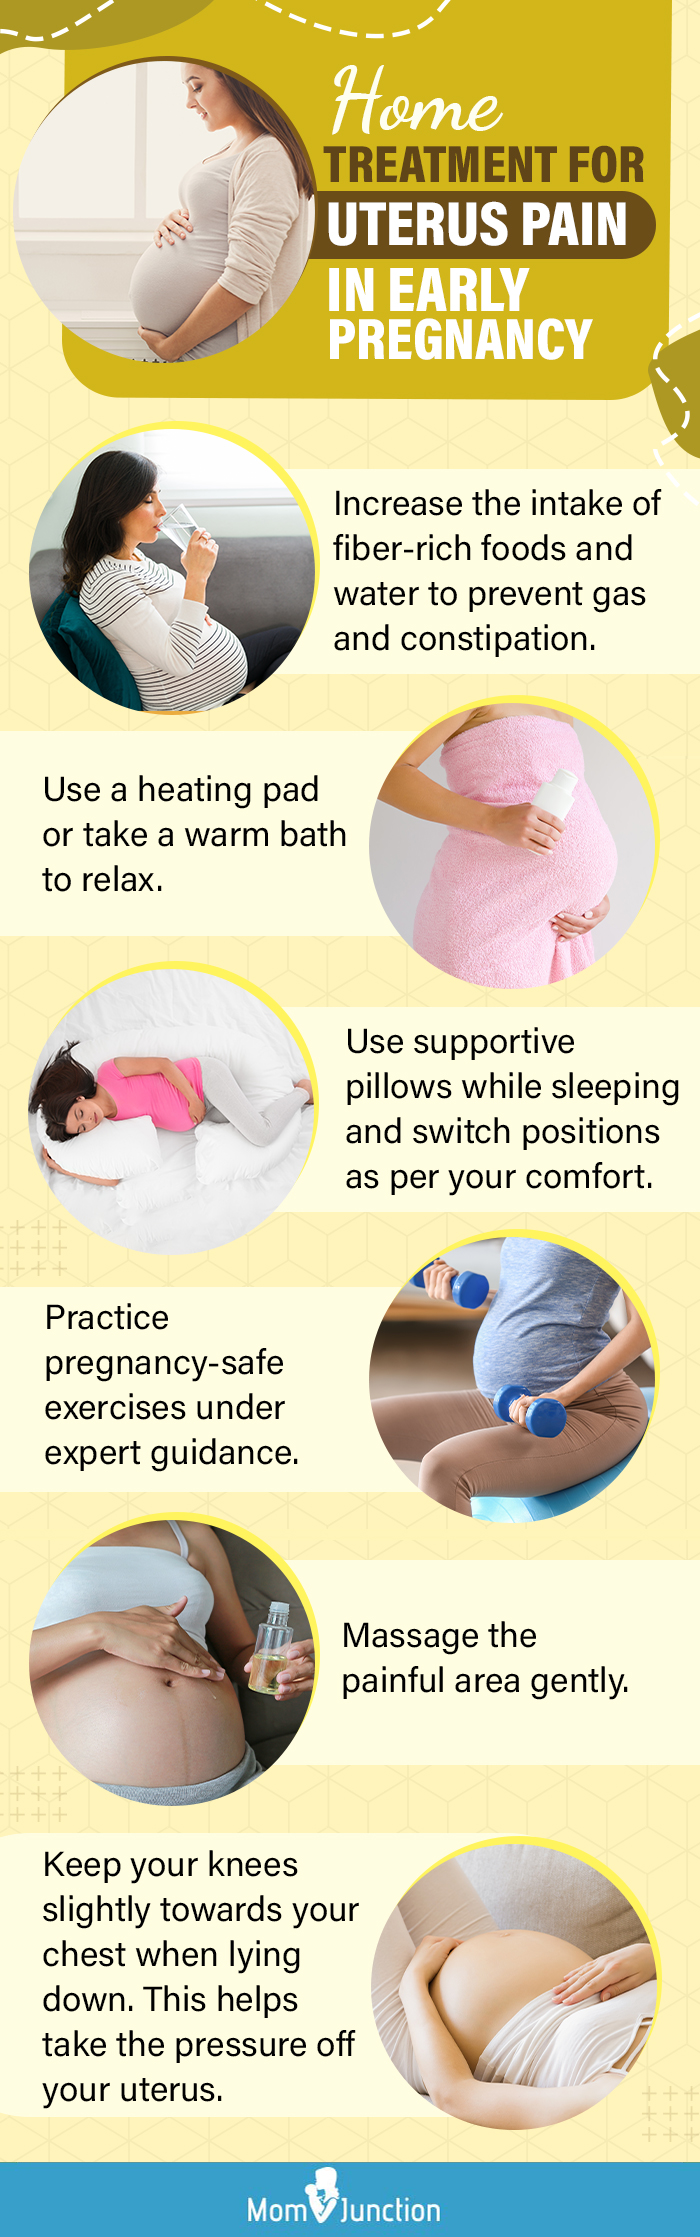 home treatment for uterus pain in early pregnancy(infographic)